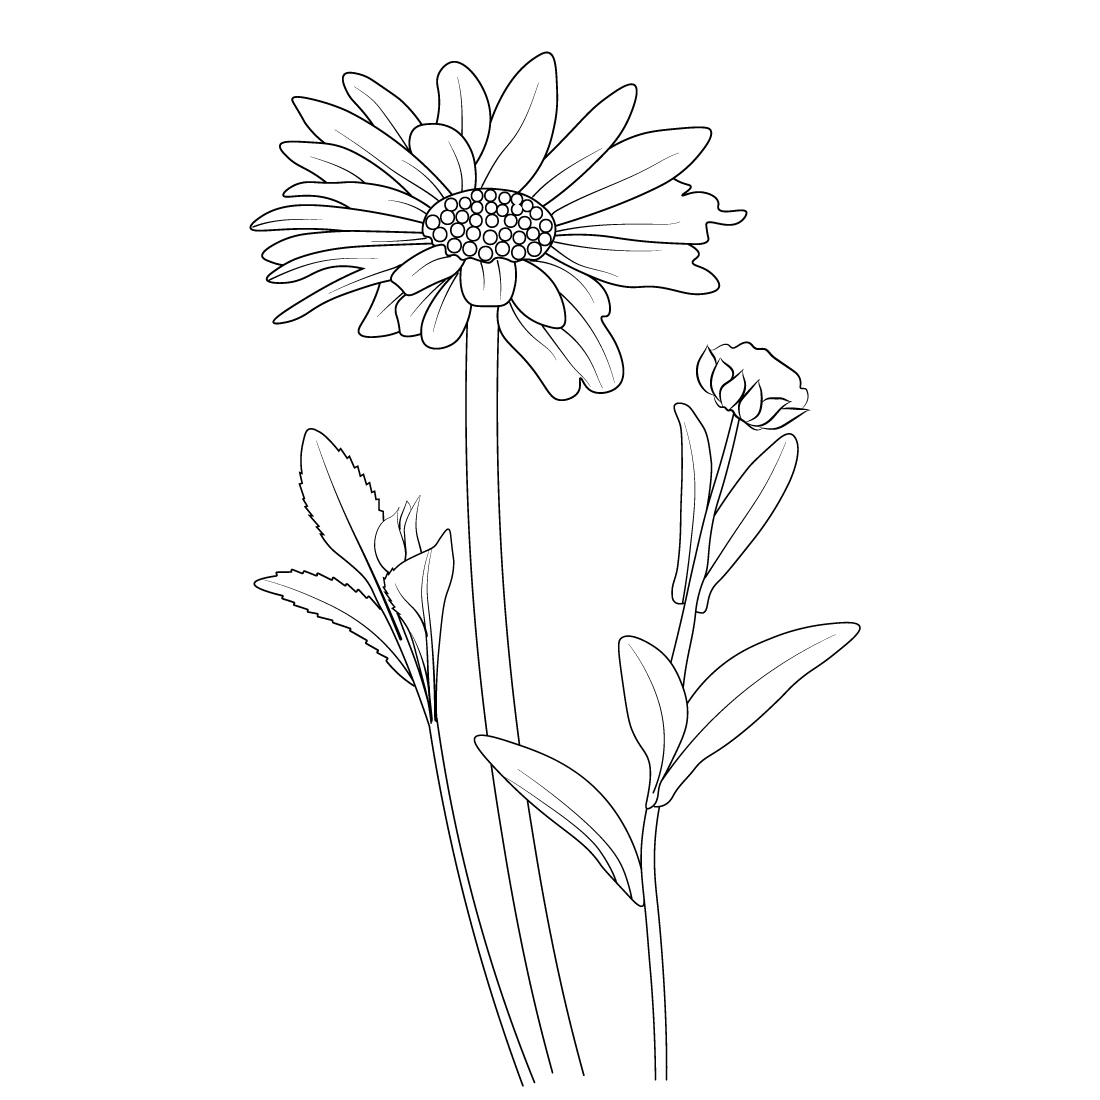 simple daisy flower drawing for kids, daisy flower line art, easy way to  draw a daisy flower